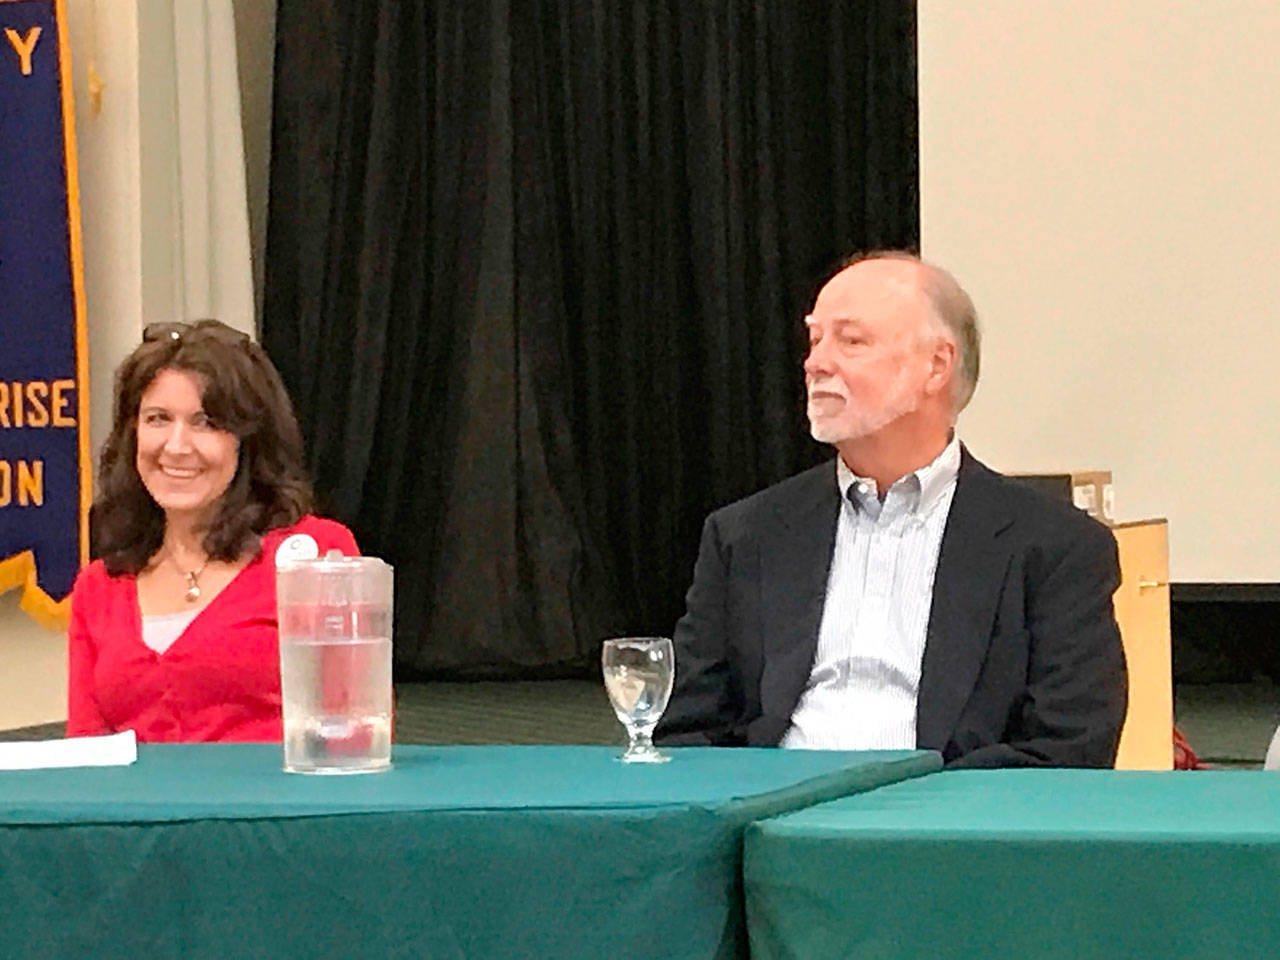 Sequim-area Port of Port Angeles commissioner candidates Colleen McAleer and Michael Cobb participated in their first general election forum Friday. (Paul Gottlieb/Peninsula Daily News)